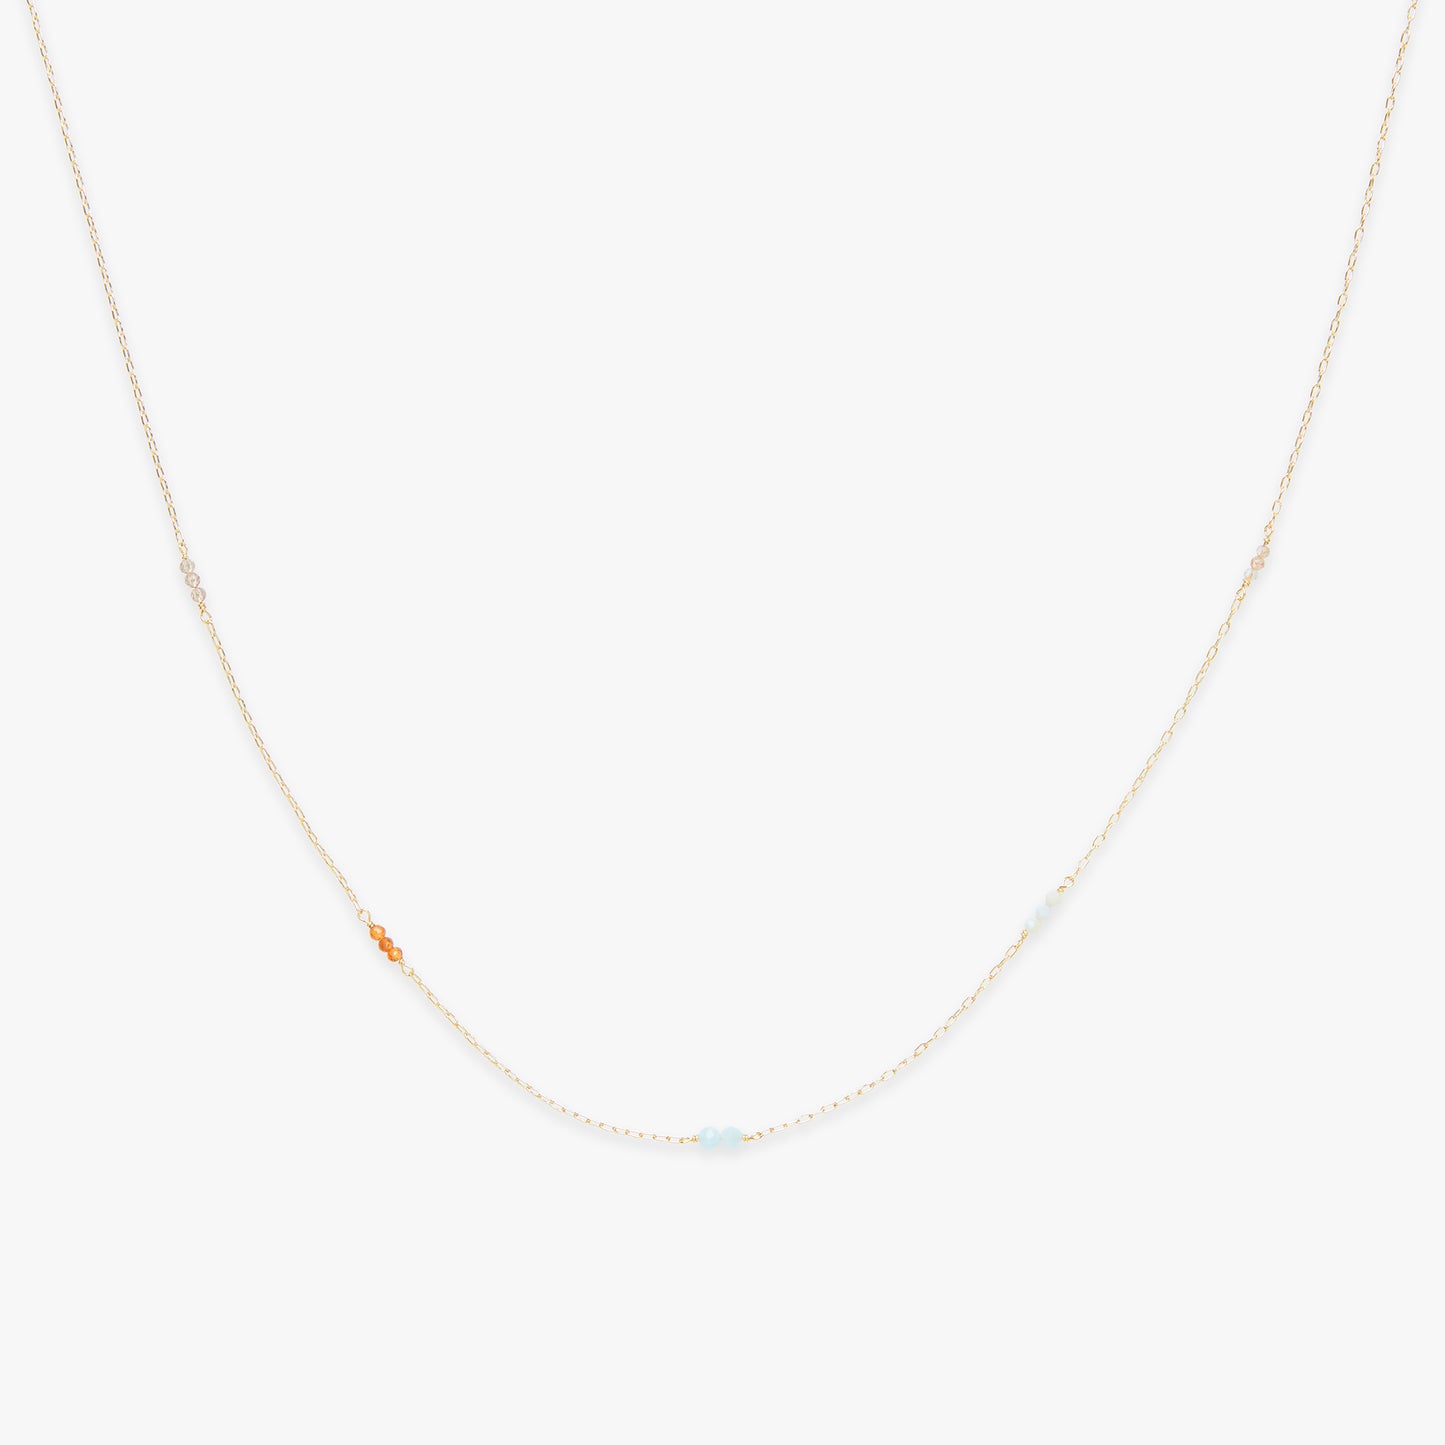 Laad afbeelding in Galerijviewer, Candy Sunset palette ketting gold filled
